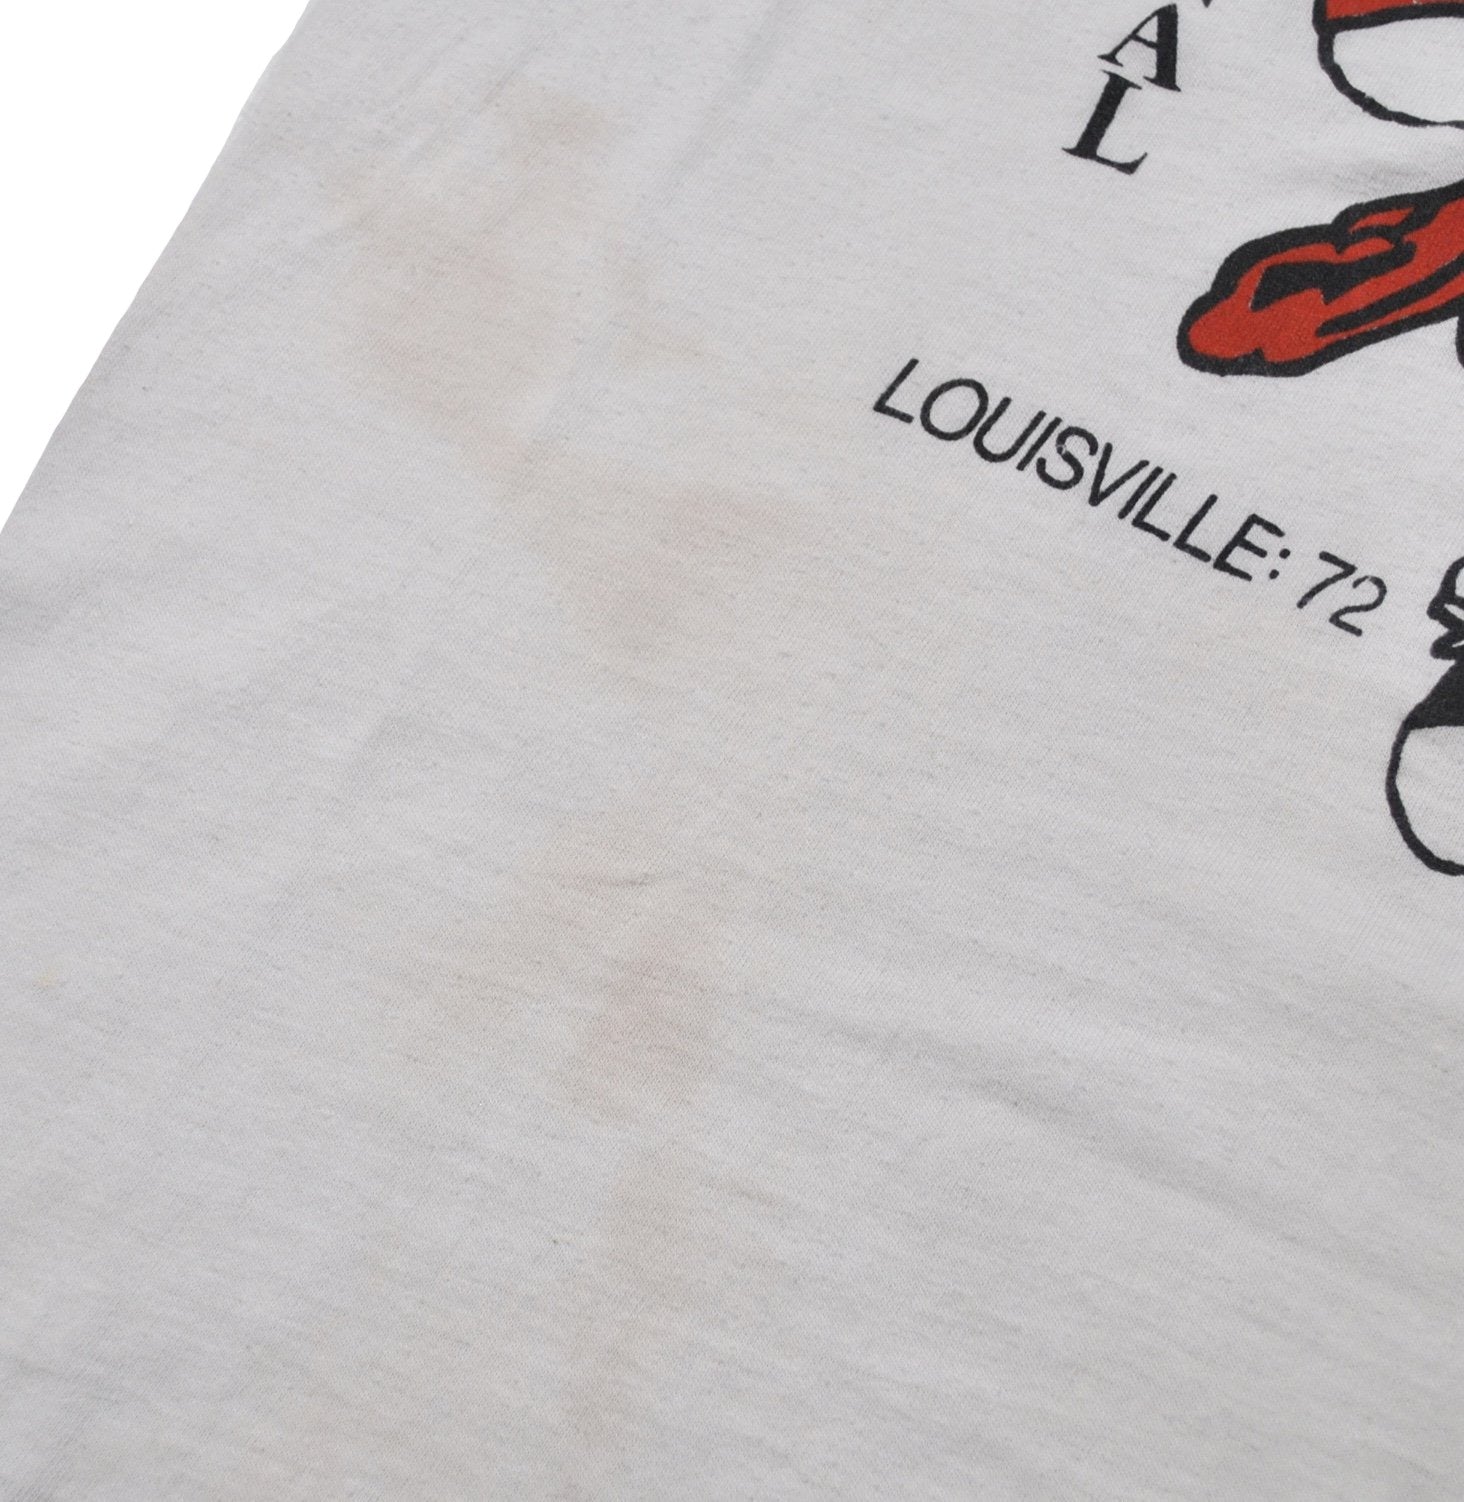 86 National Champions Louisville Cardinals shirt t-shirt by To-Tee